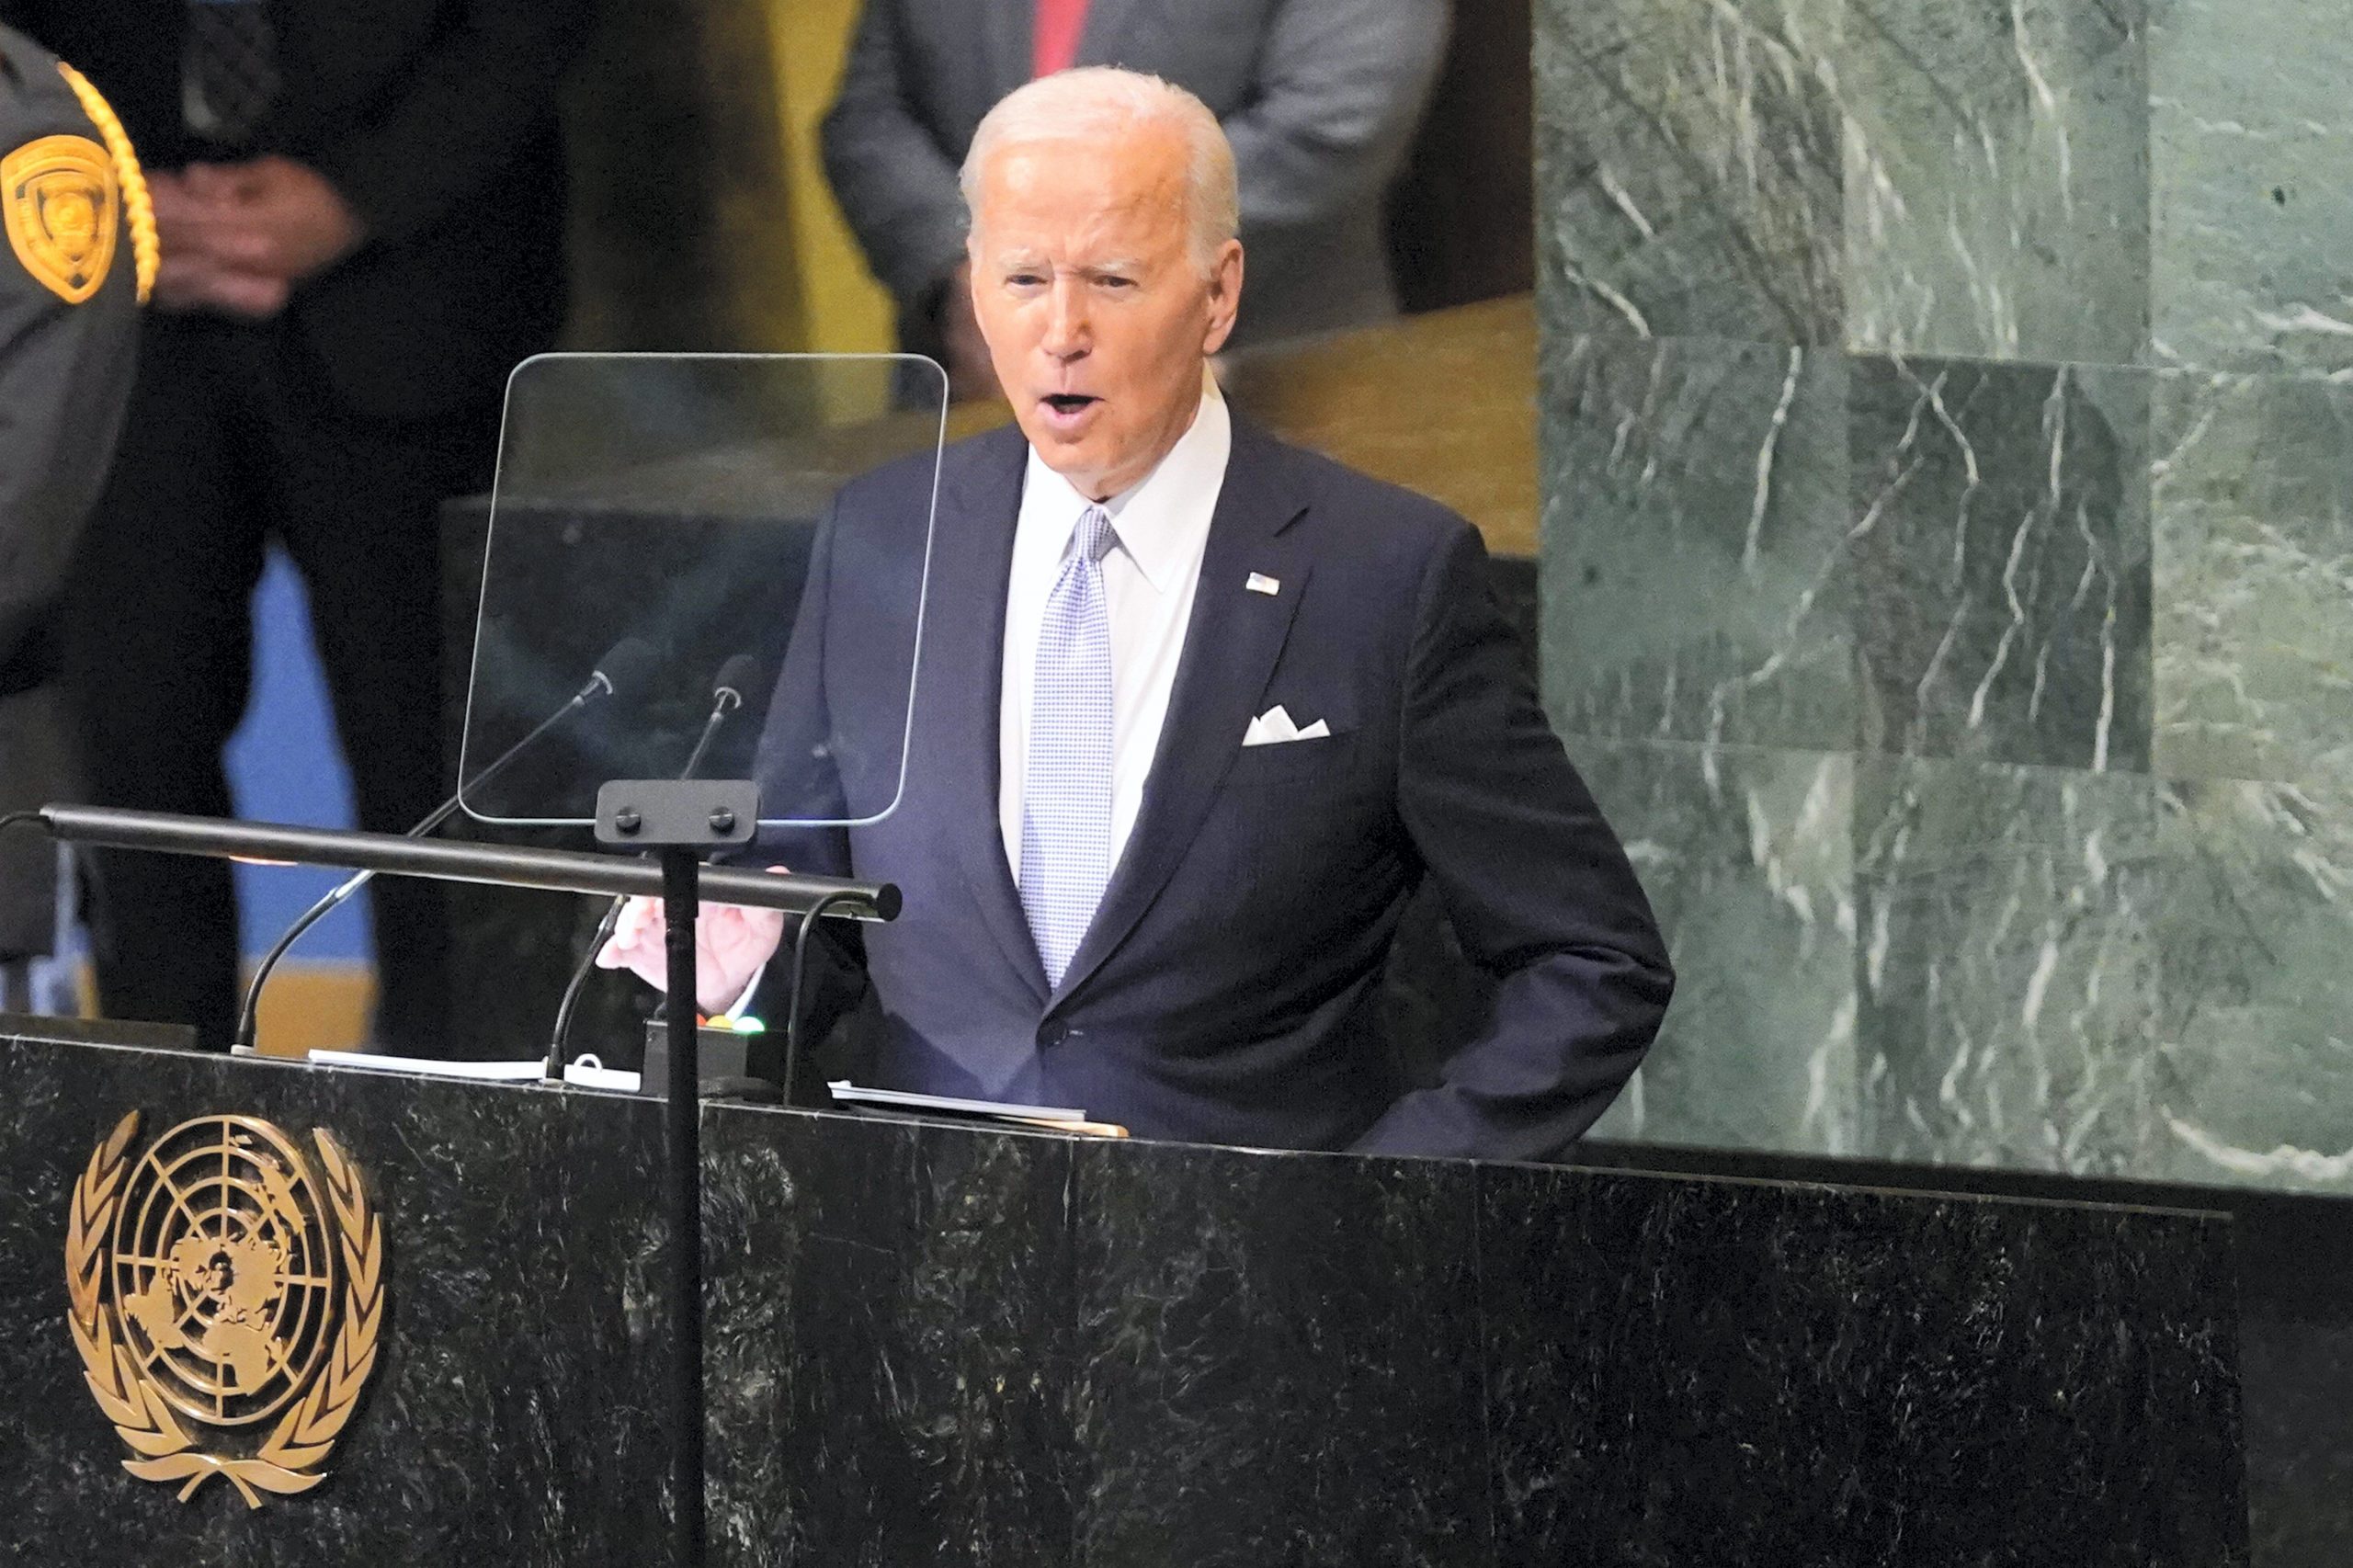 Joe Biden at UNGA: 5 things you need to know